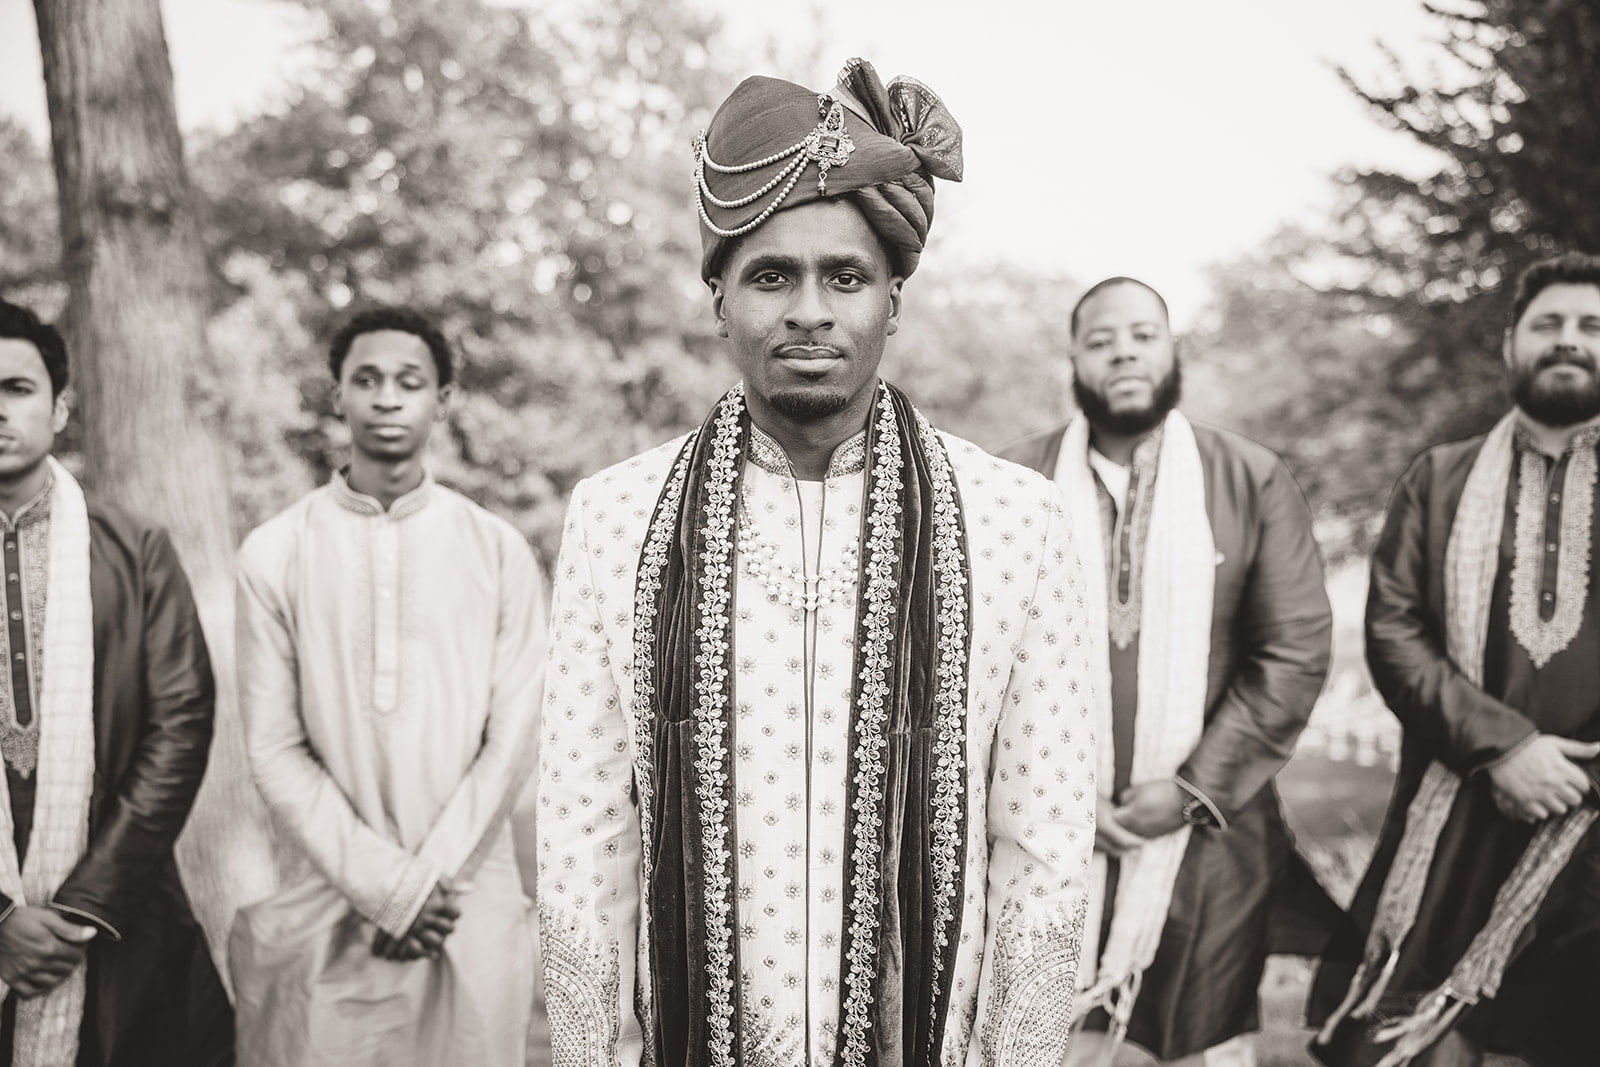 A monochrome image of a groom posing with his groomsmen with him being at the center